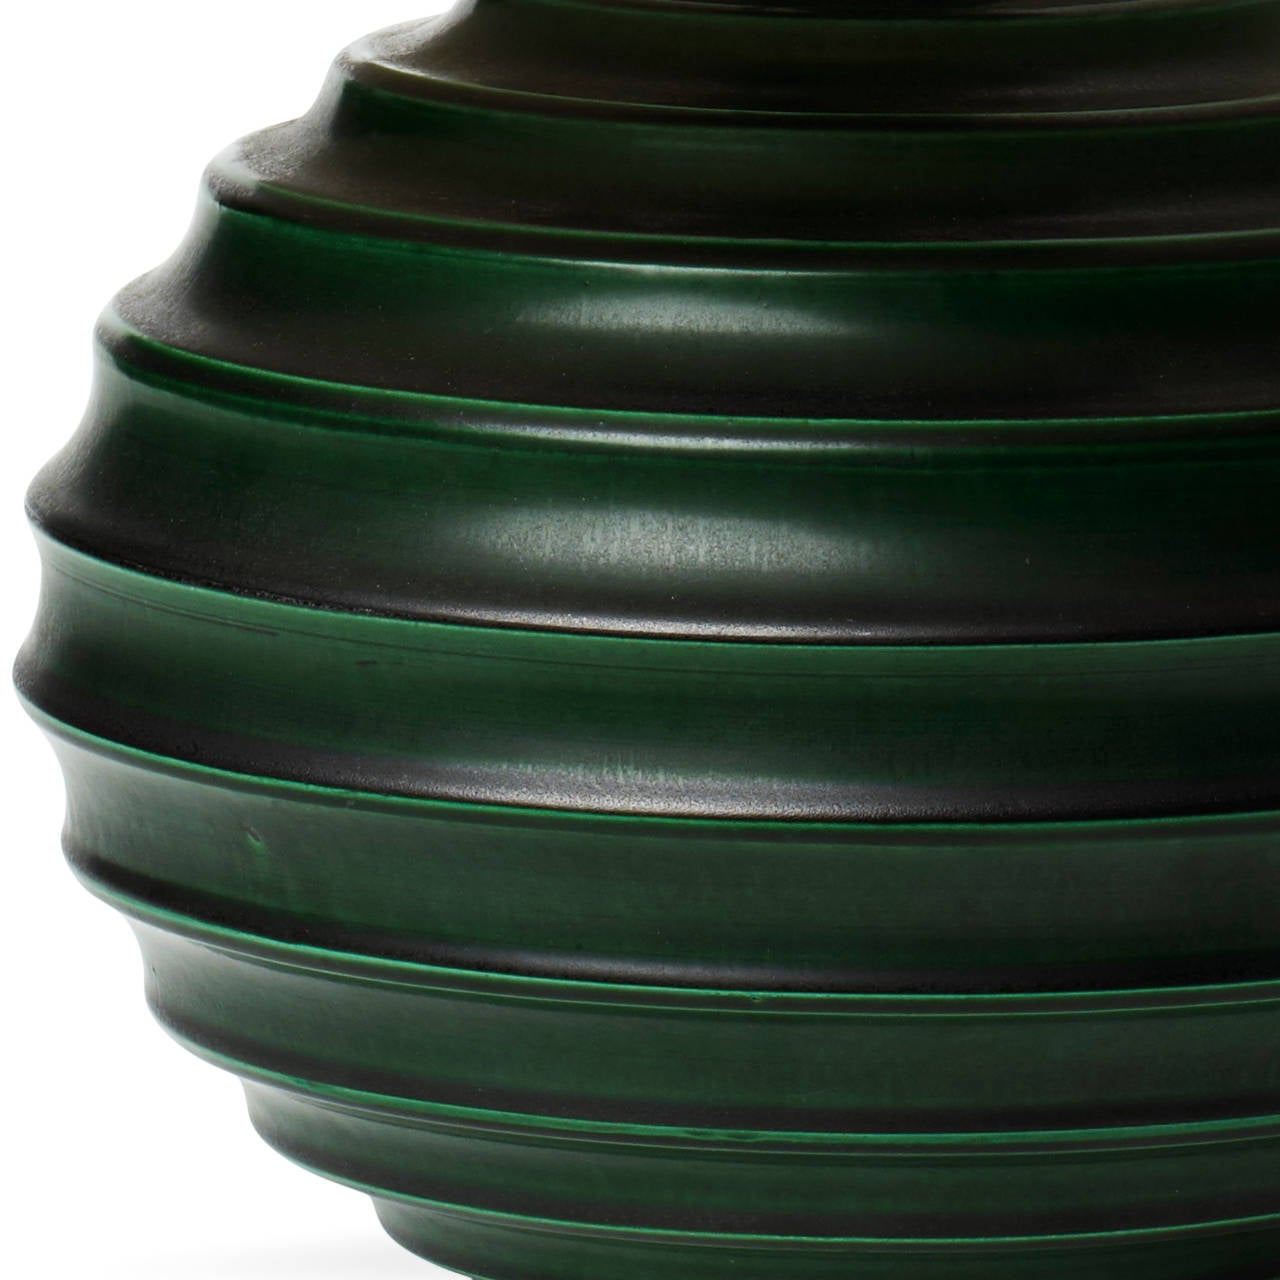 Table lamp with sculptural fluting stacked horizontally around its circumference, in stoneware glazed a deep green, designed by painter / designer Ewald Dahlskog (1894-1950) for Bo Fajans, Sweden, circa 1930.

An iconic example of early funkis